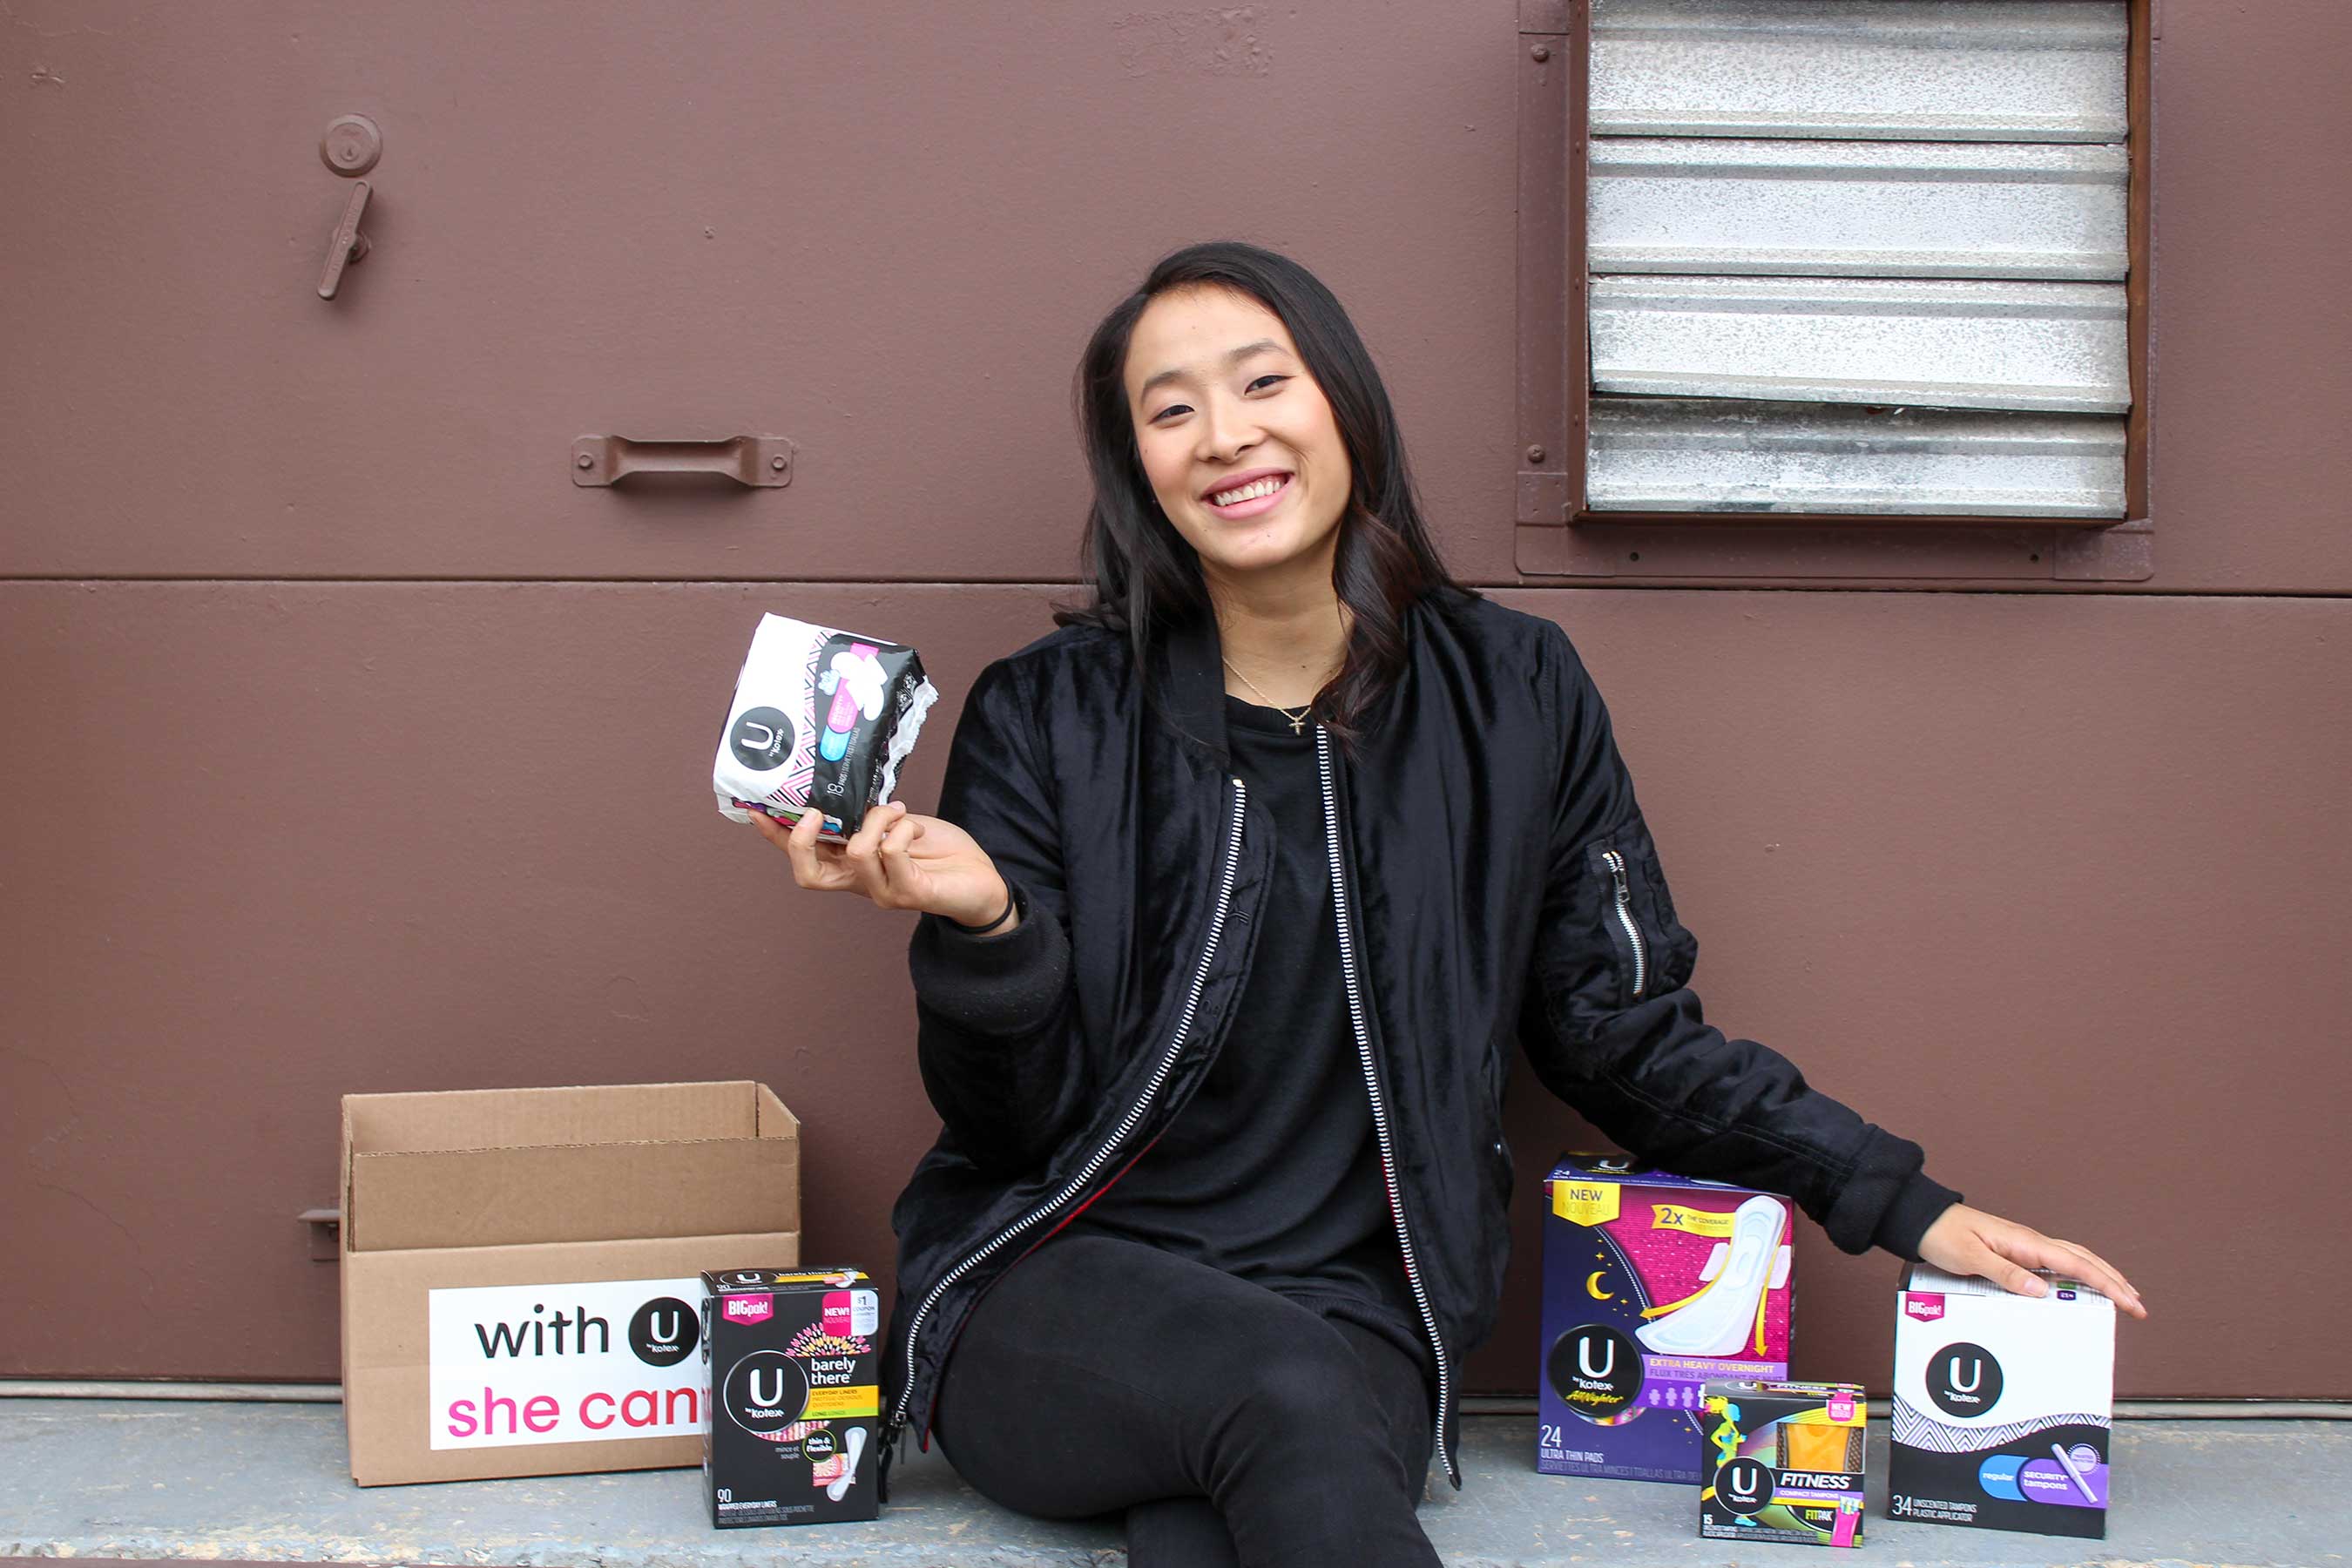 Nadya Okamoto, founder of PERIOD, partners with U by Kotex® for With U, She Can, raising awareness of and access to the nearly one in four women struggling to access period products.       